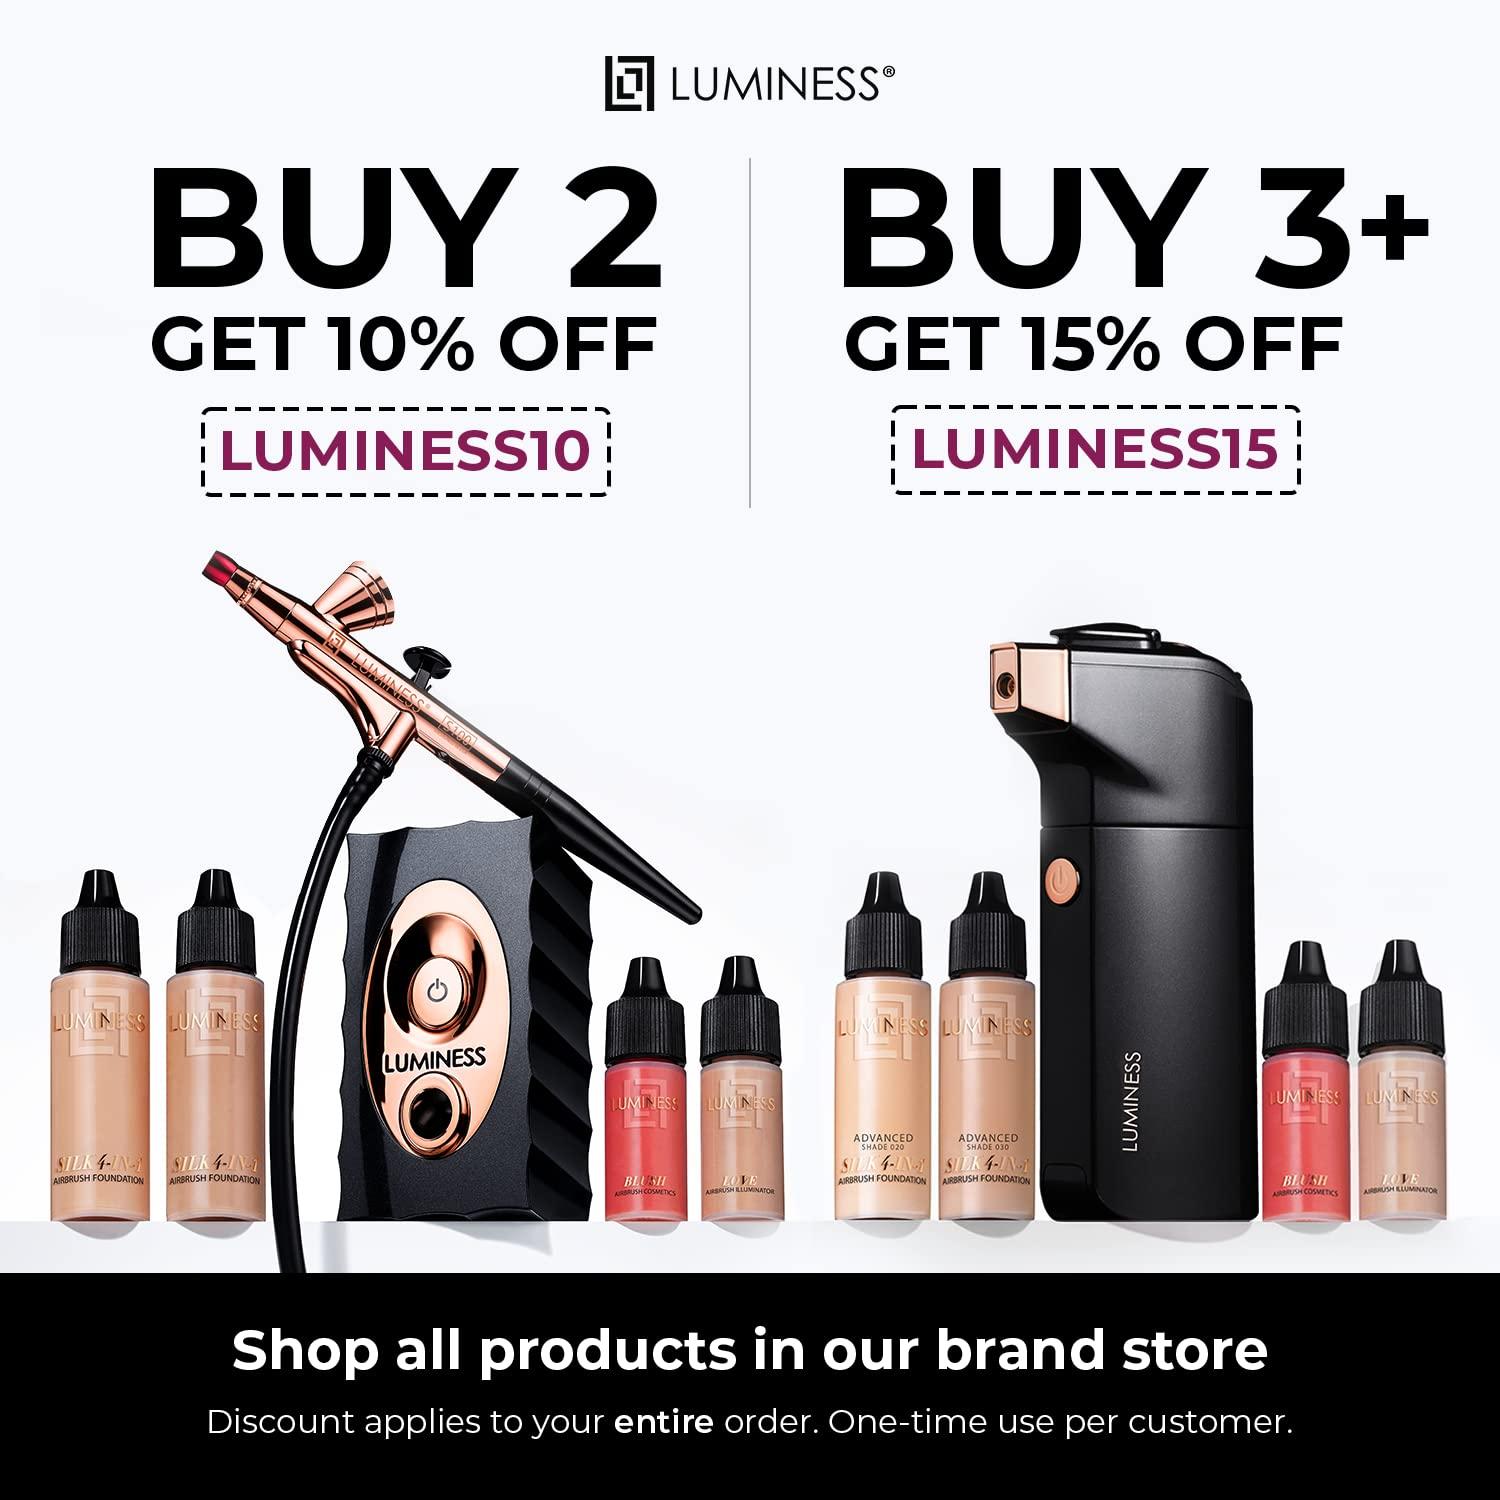 Luminess Airbrush Make-up system with makeup 